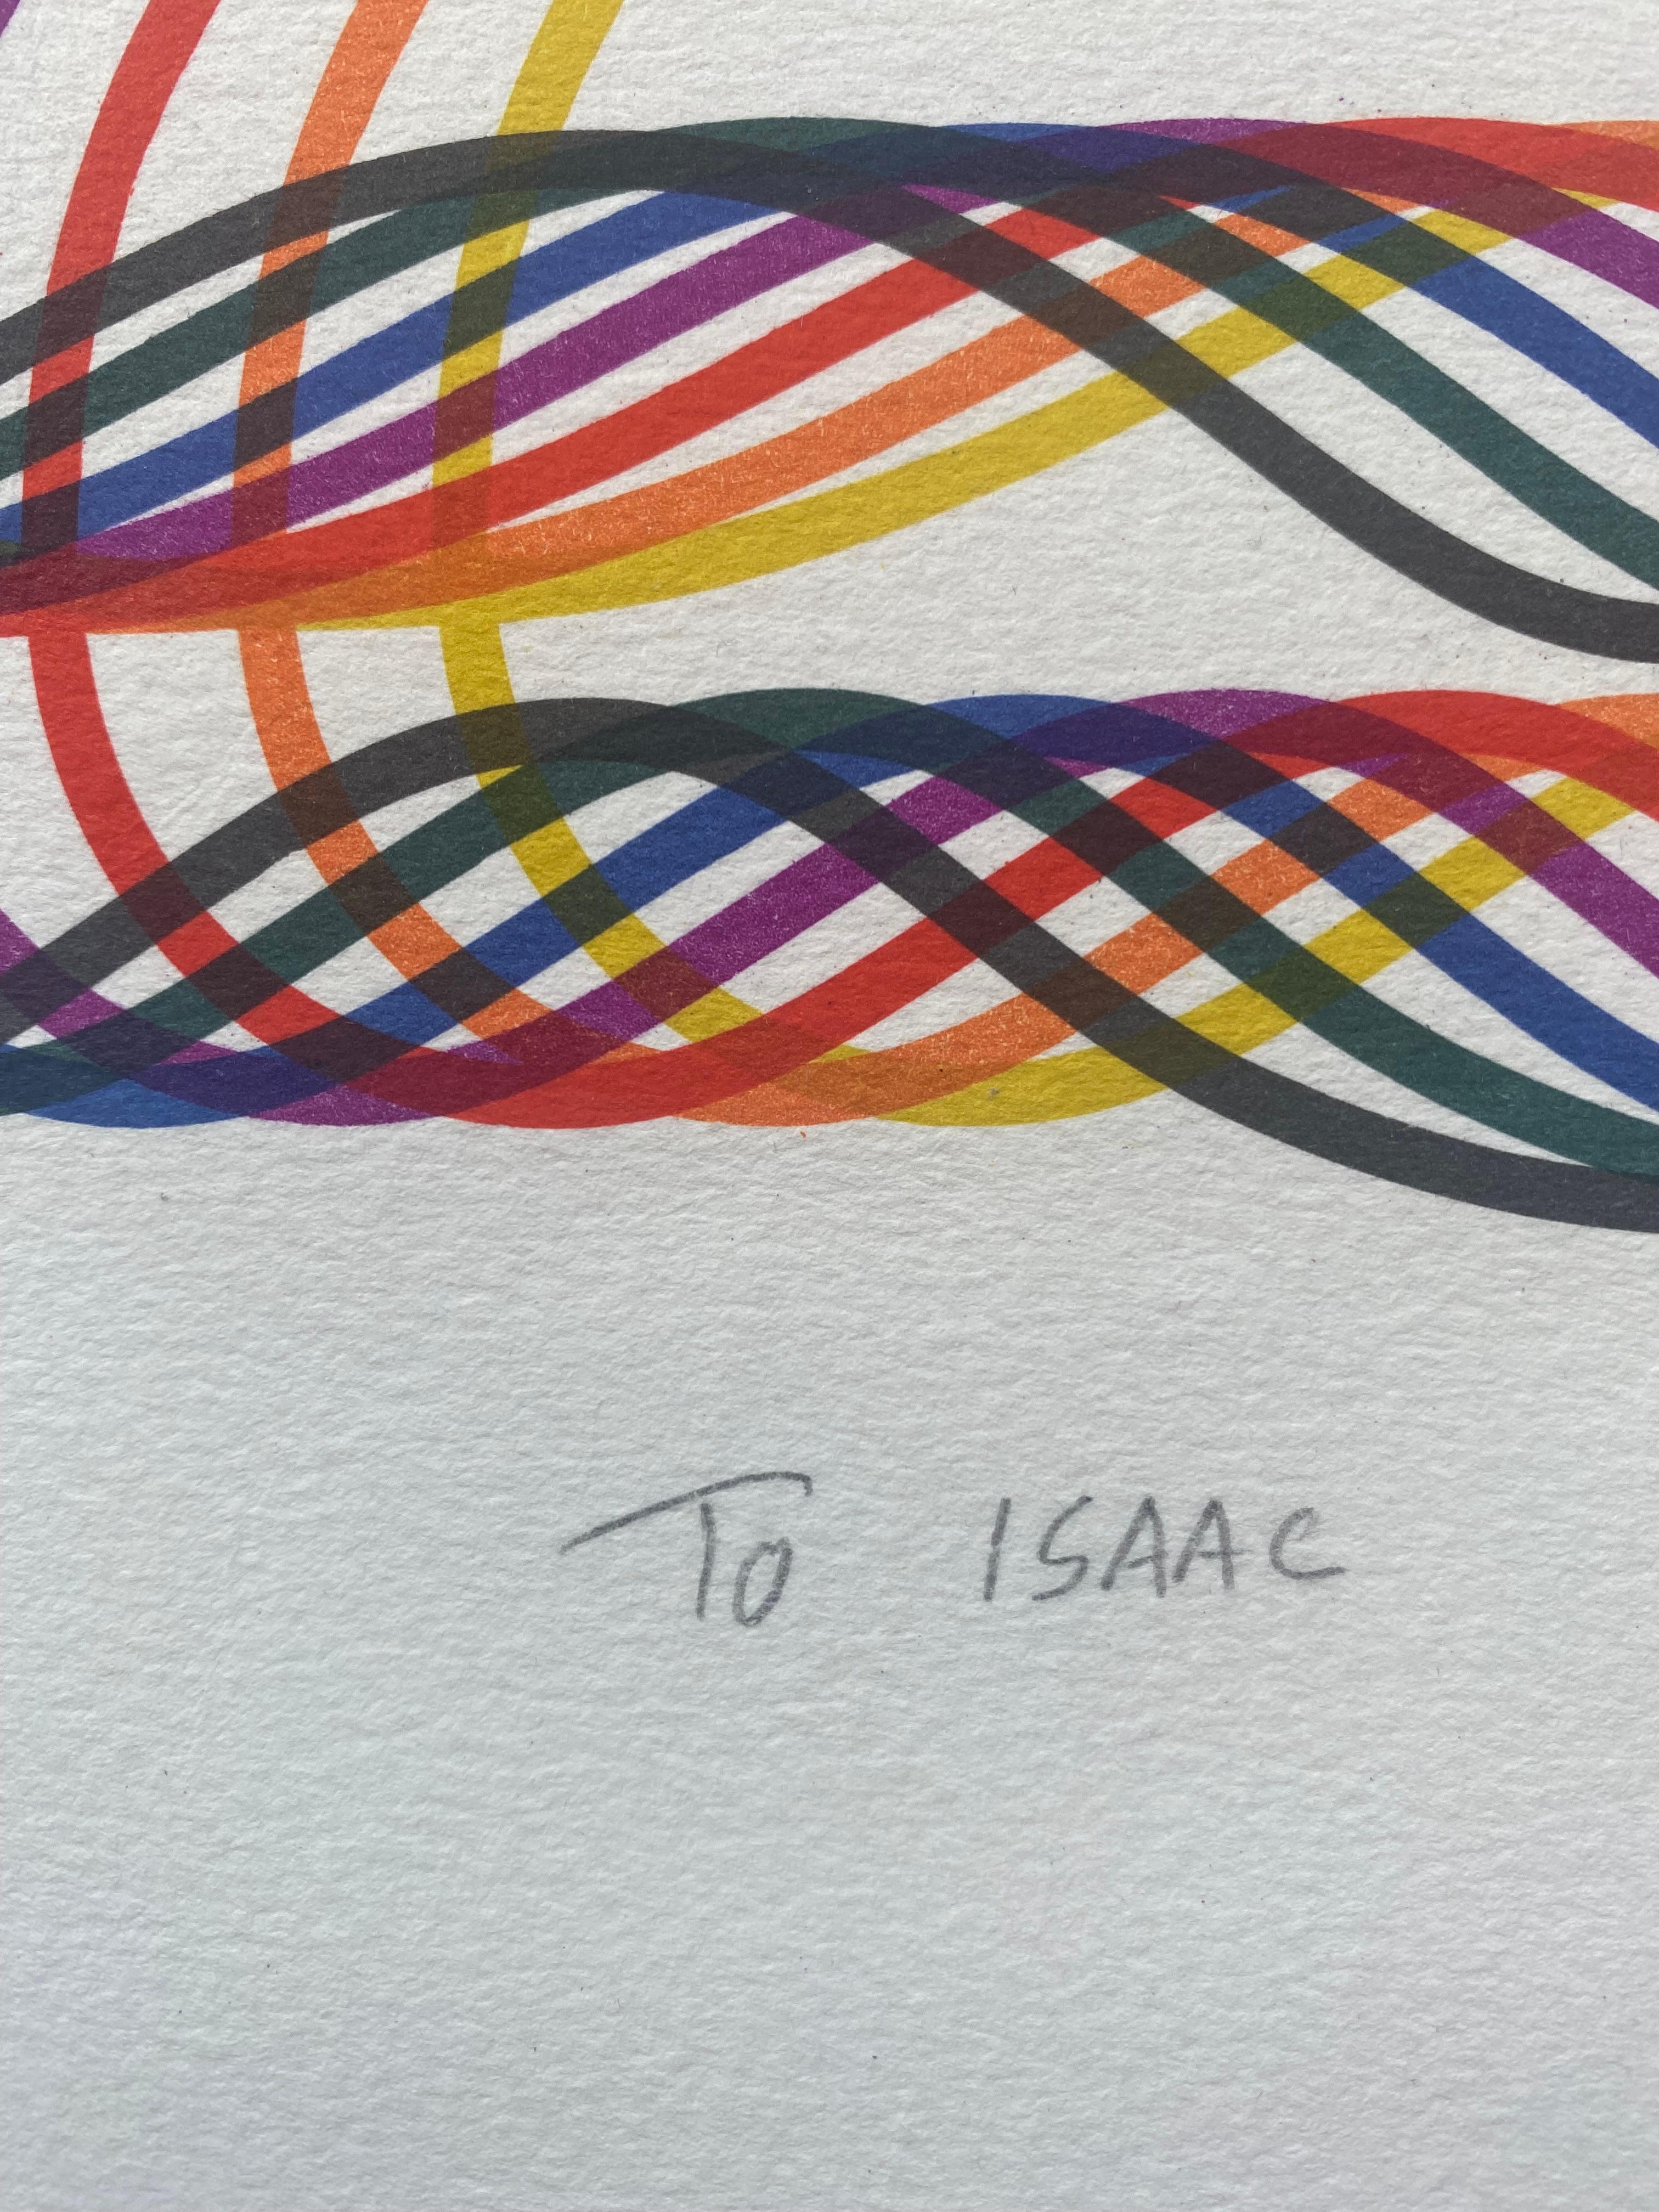 Serigraph Dedicated to Isaac, Agam, 1975 In Good Condition For Sale In Saint ouen, FR